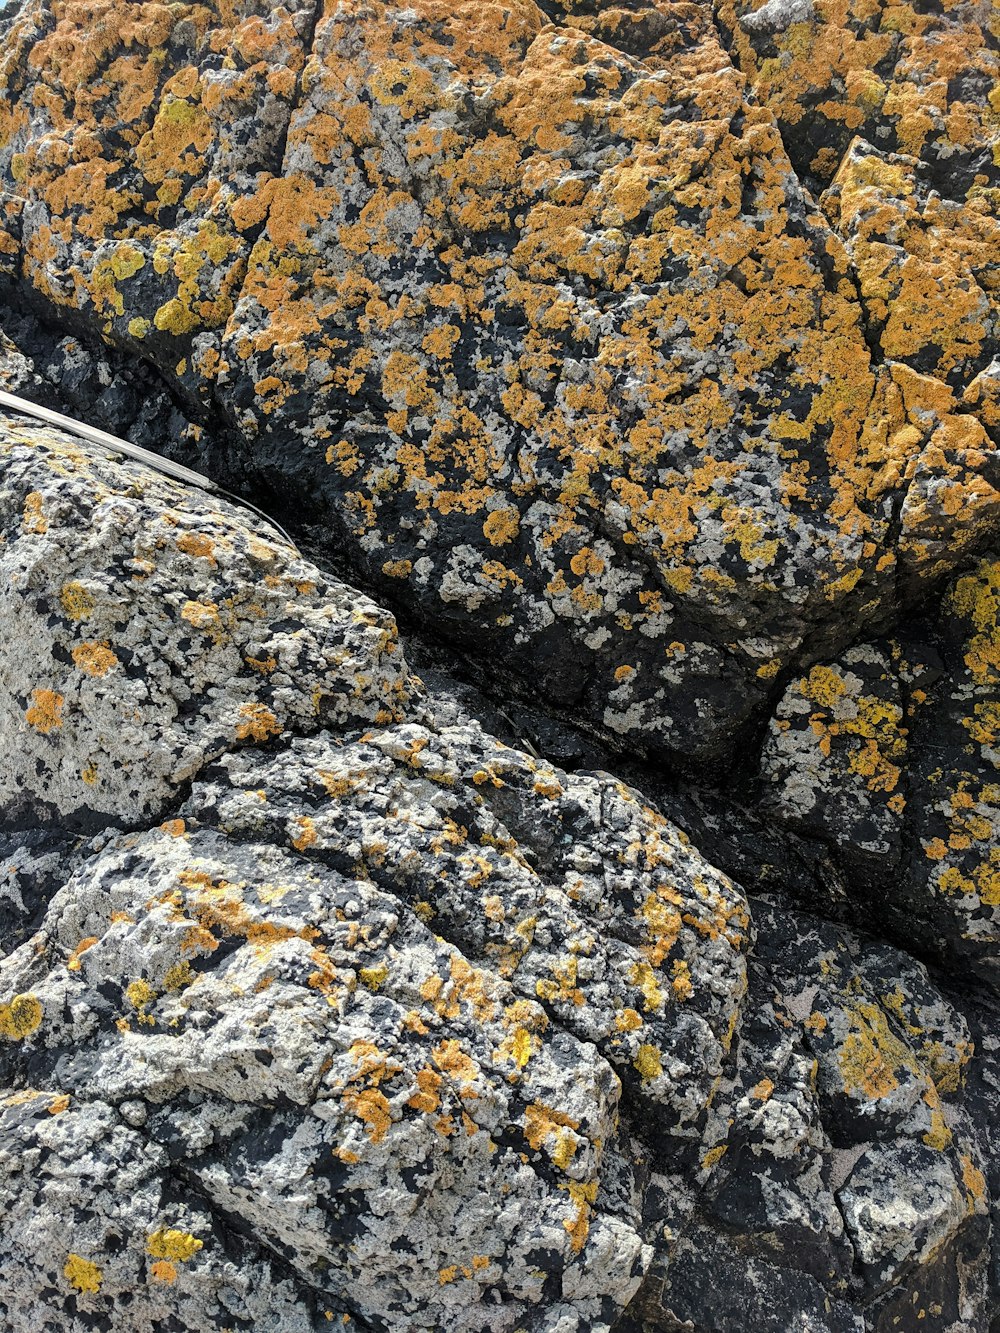 a close up of rocks with yellow moss growing on them